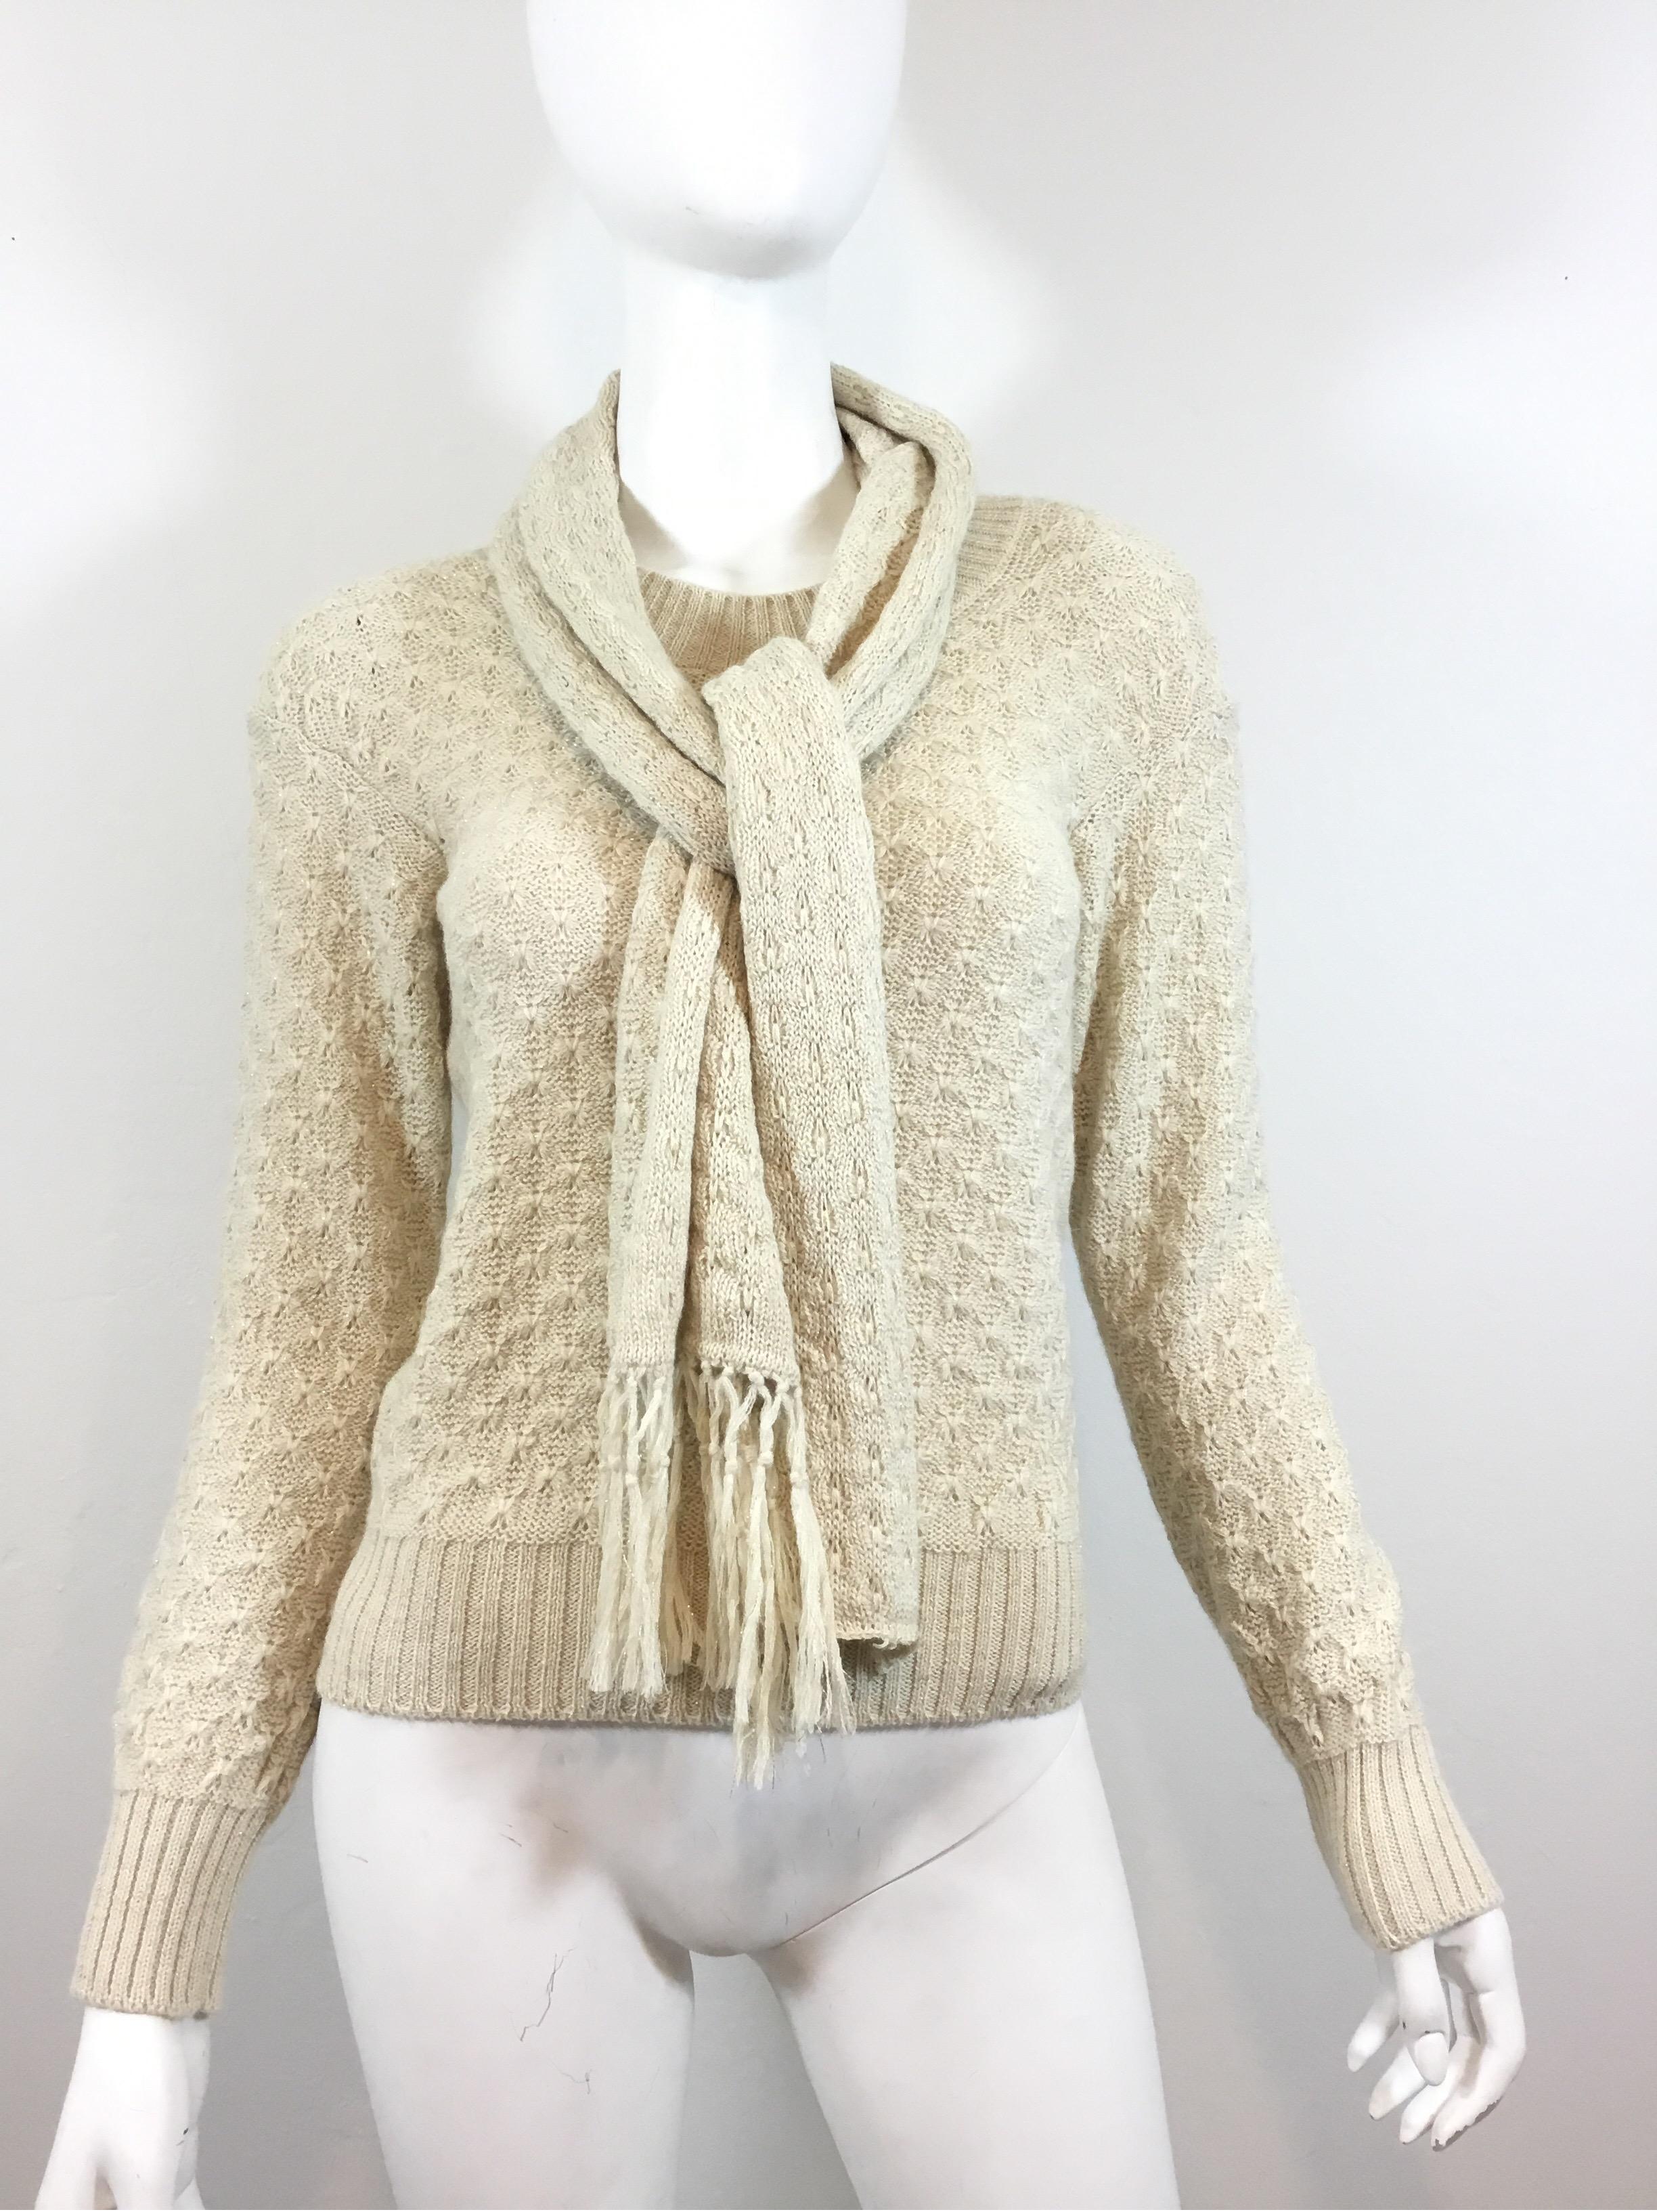 Chanel metallic cream knit pullover sweater with scarf included. Sweater has ribbed hemming and a pullover entry. Labeled size 38, made in Italy, and composed with a blend of alpaca/rayon/polyester. 

Bust 33'' (with stretch), sleeves 22'', length